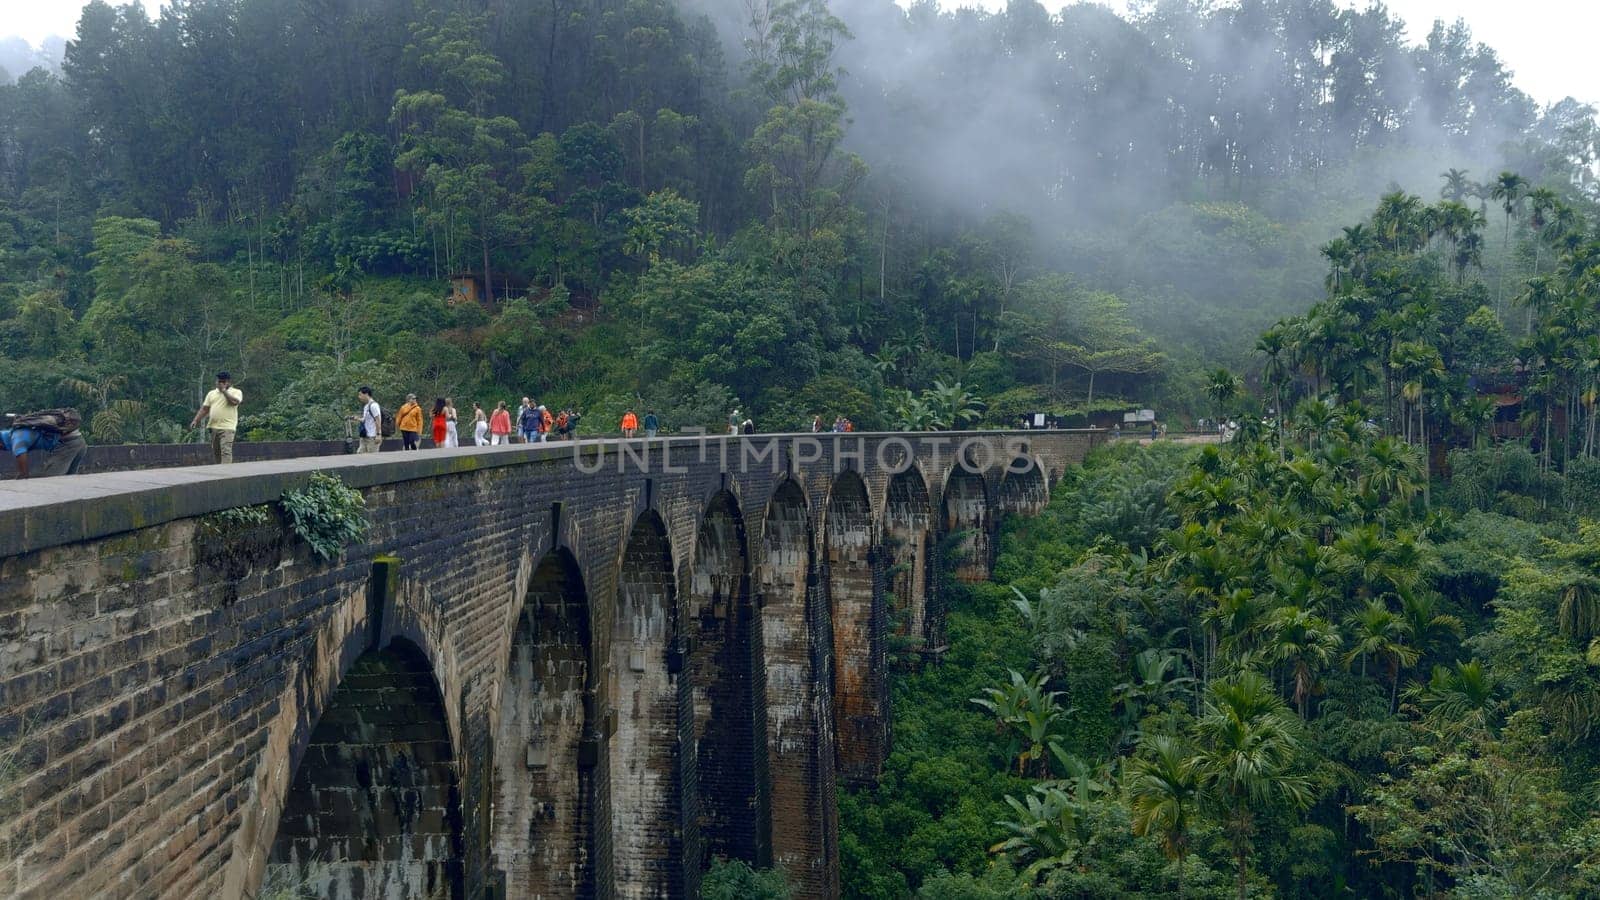 Ancient stone aqueduct in green mountains. Action. Ancient stone bridge with arches in green mountains. Tourists walk on ancient bridge in valley of tropical mountain forests.